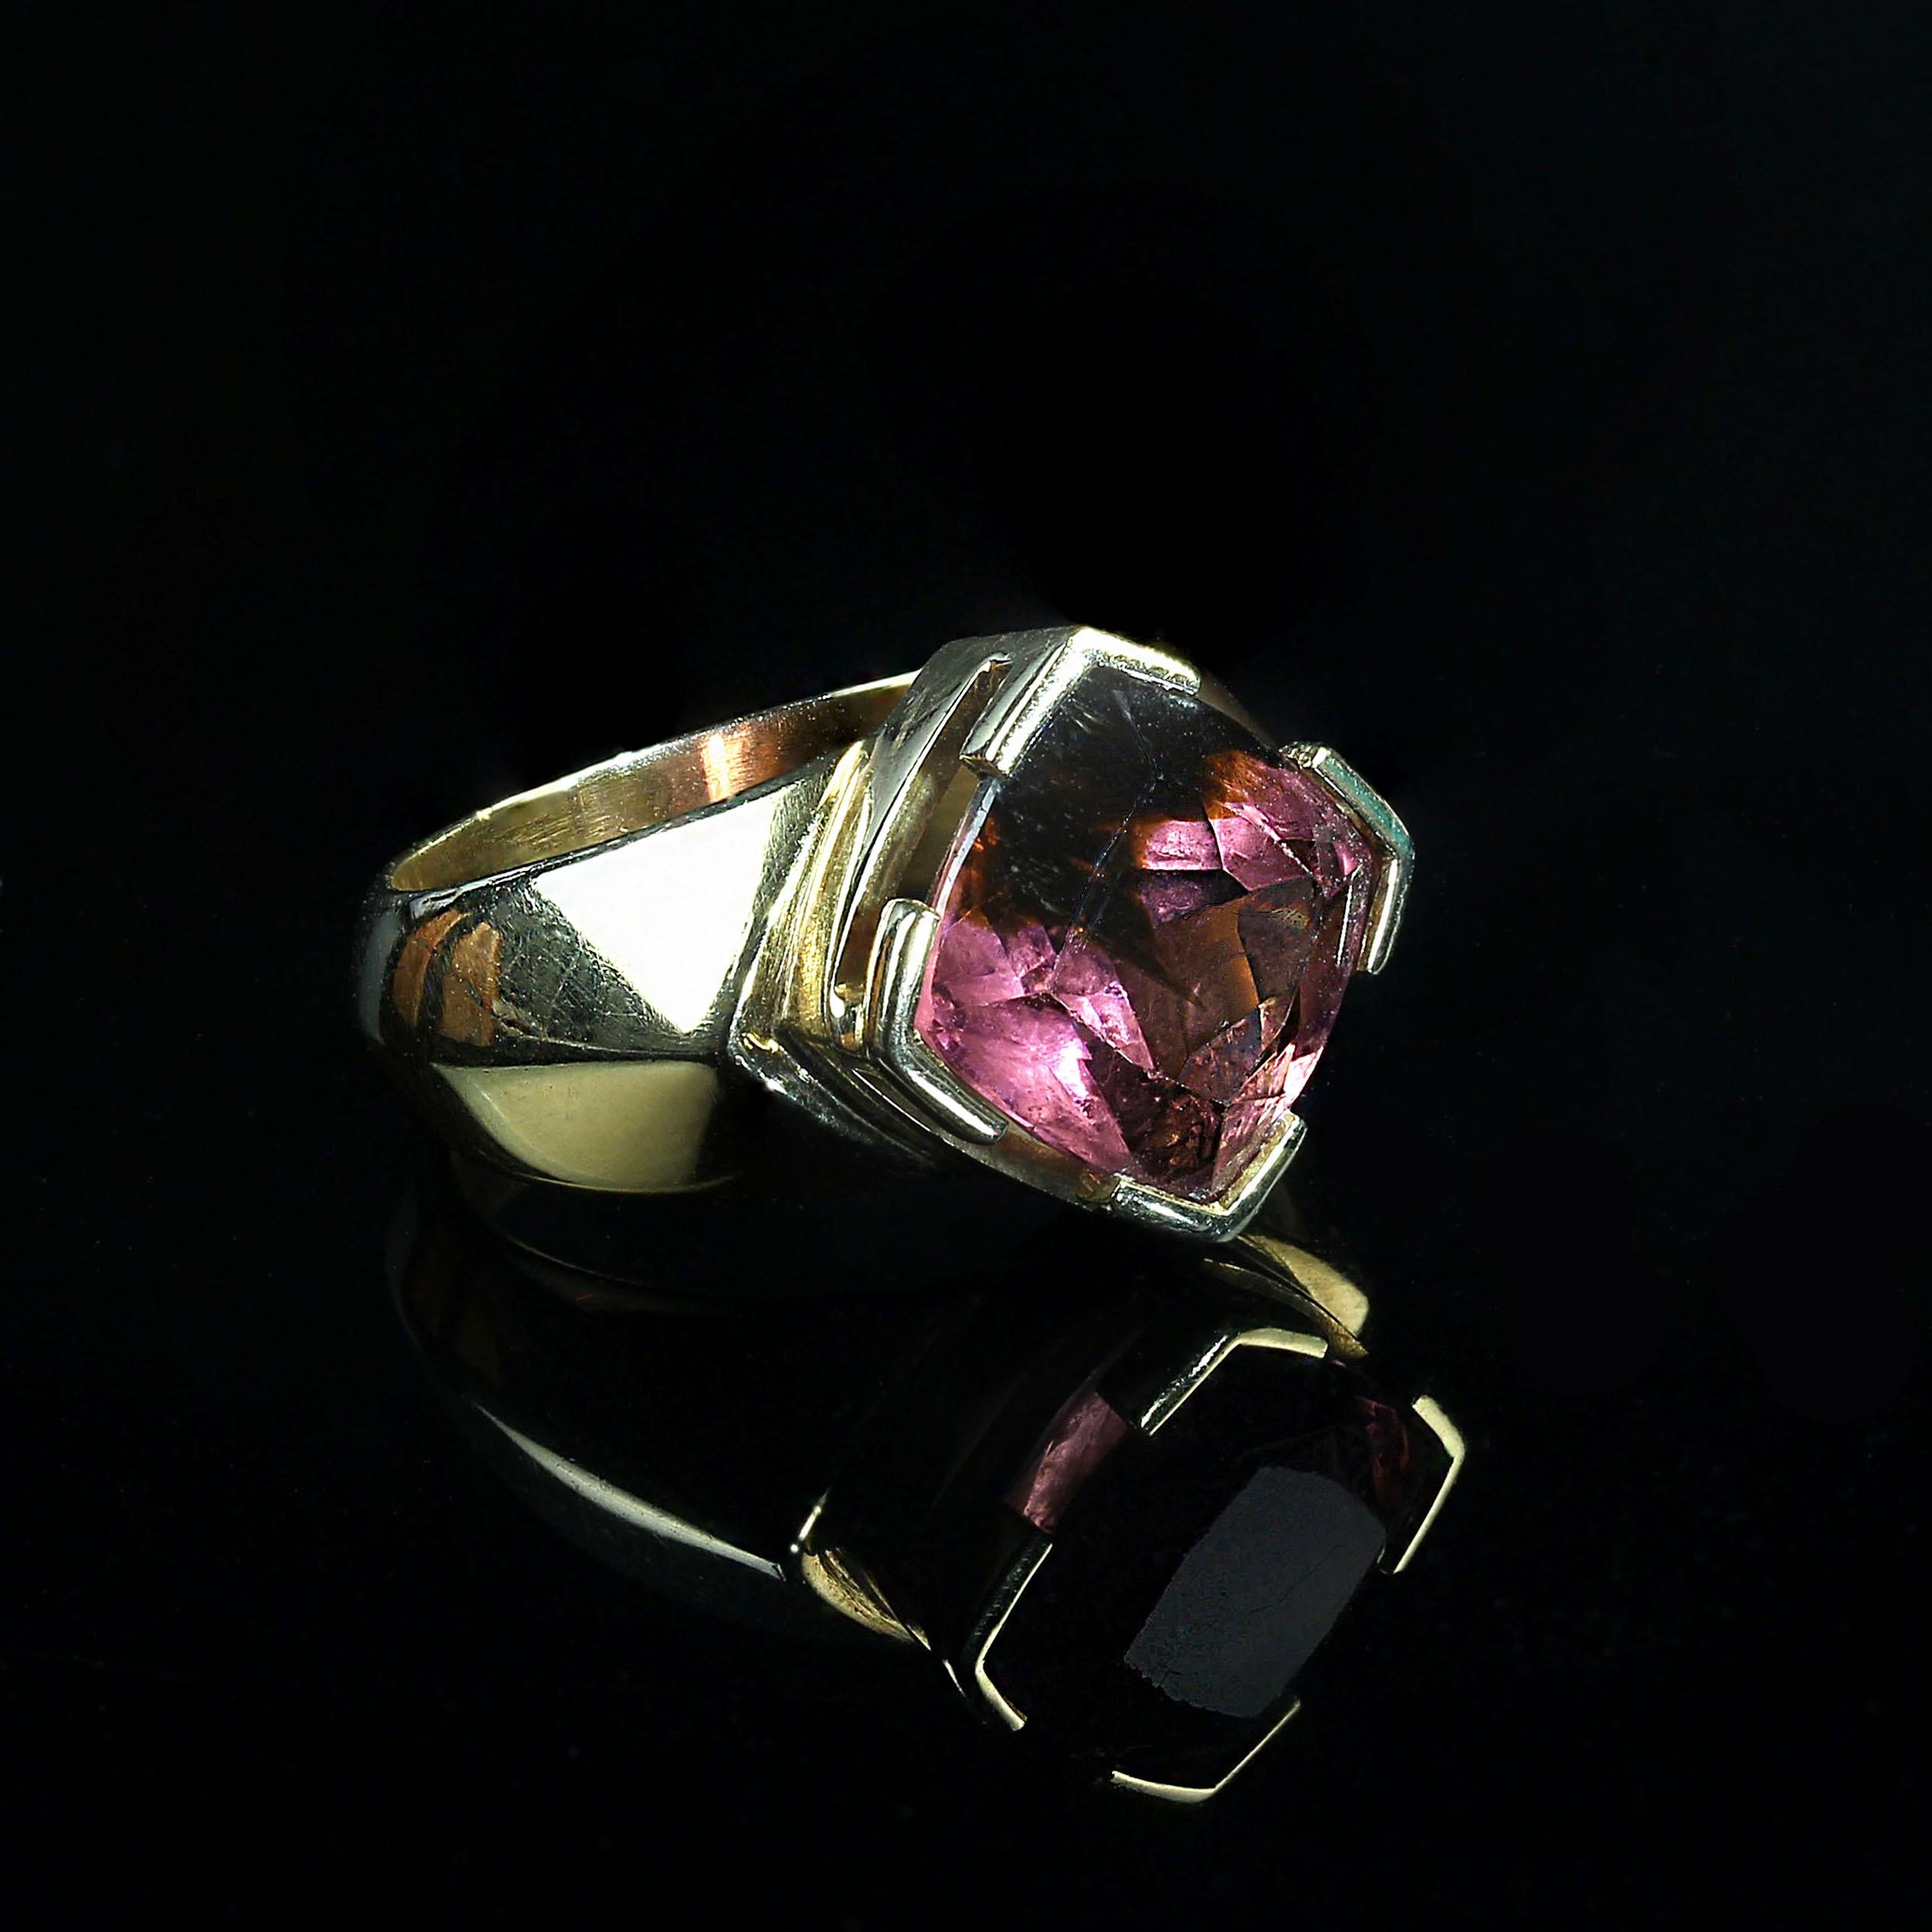 This is your perfect gift.  A gorgeous Brazilian cushion cut pink and green 10x10mm tourmaline set in it's own handmade 18K rich yellow gold ring. The ring is lots of luscious, rich 18K yellow gold to enhance this unique pink and green tourmaline.